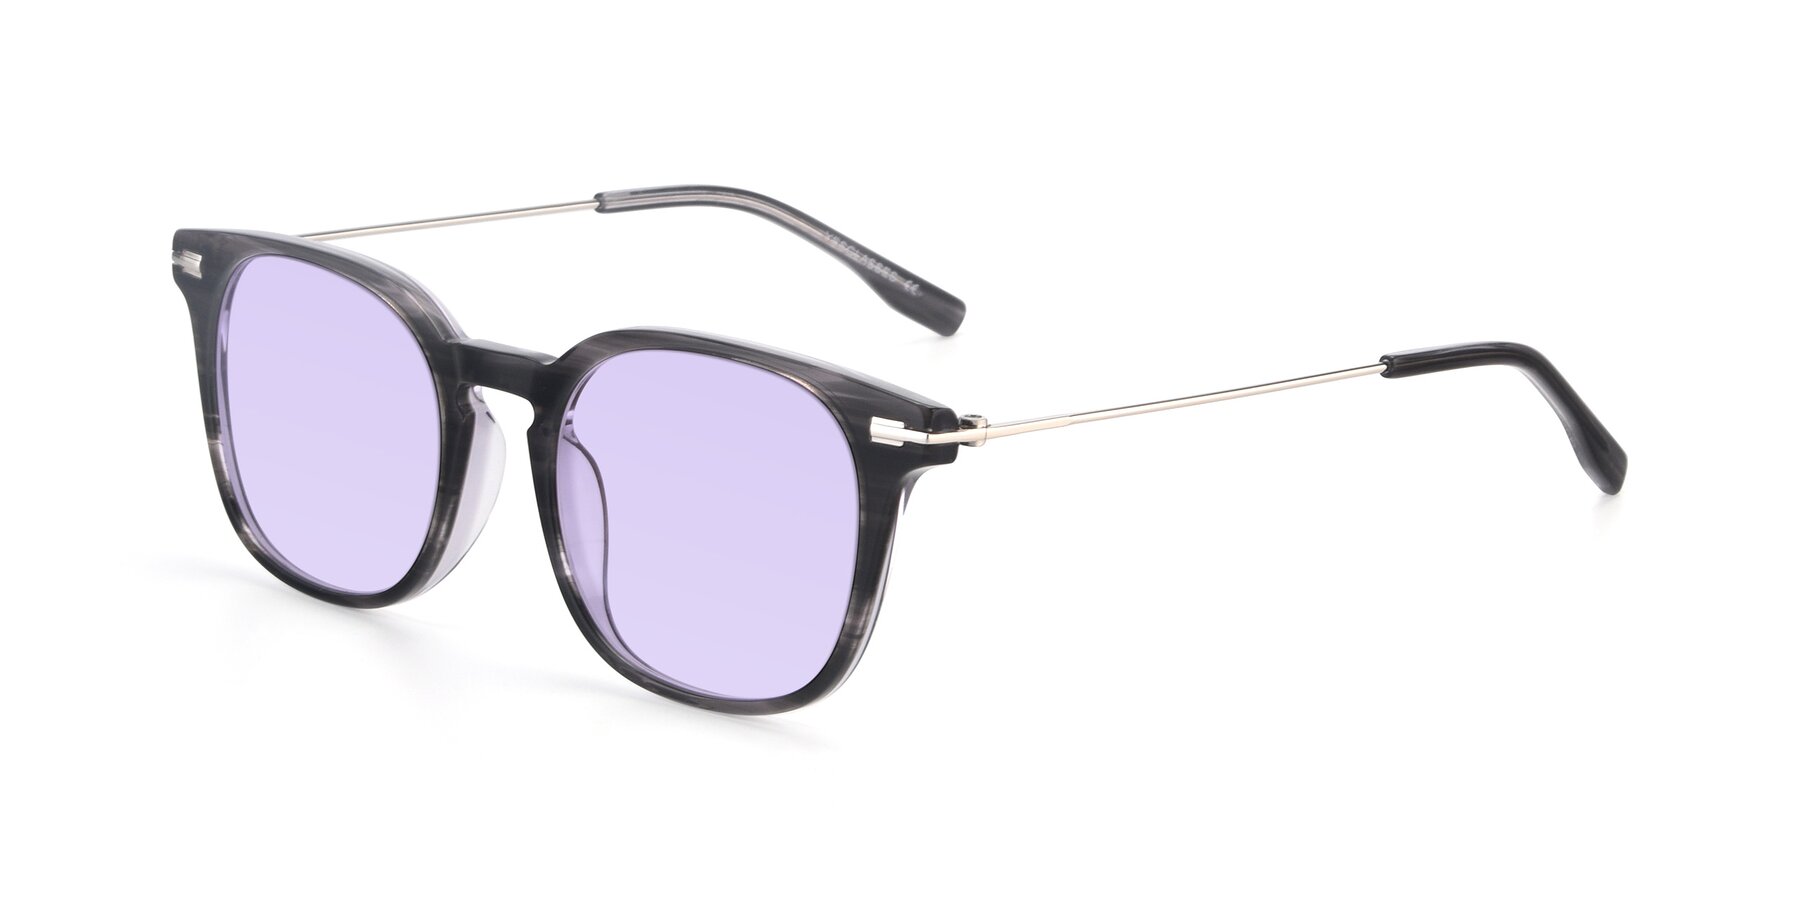 Angle of 17711 in Grey with Light Purple Tinted Lenses